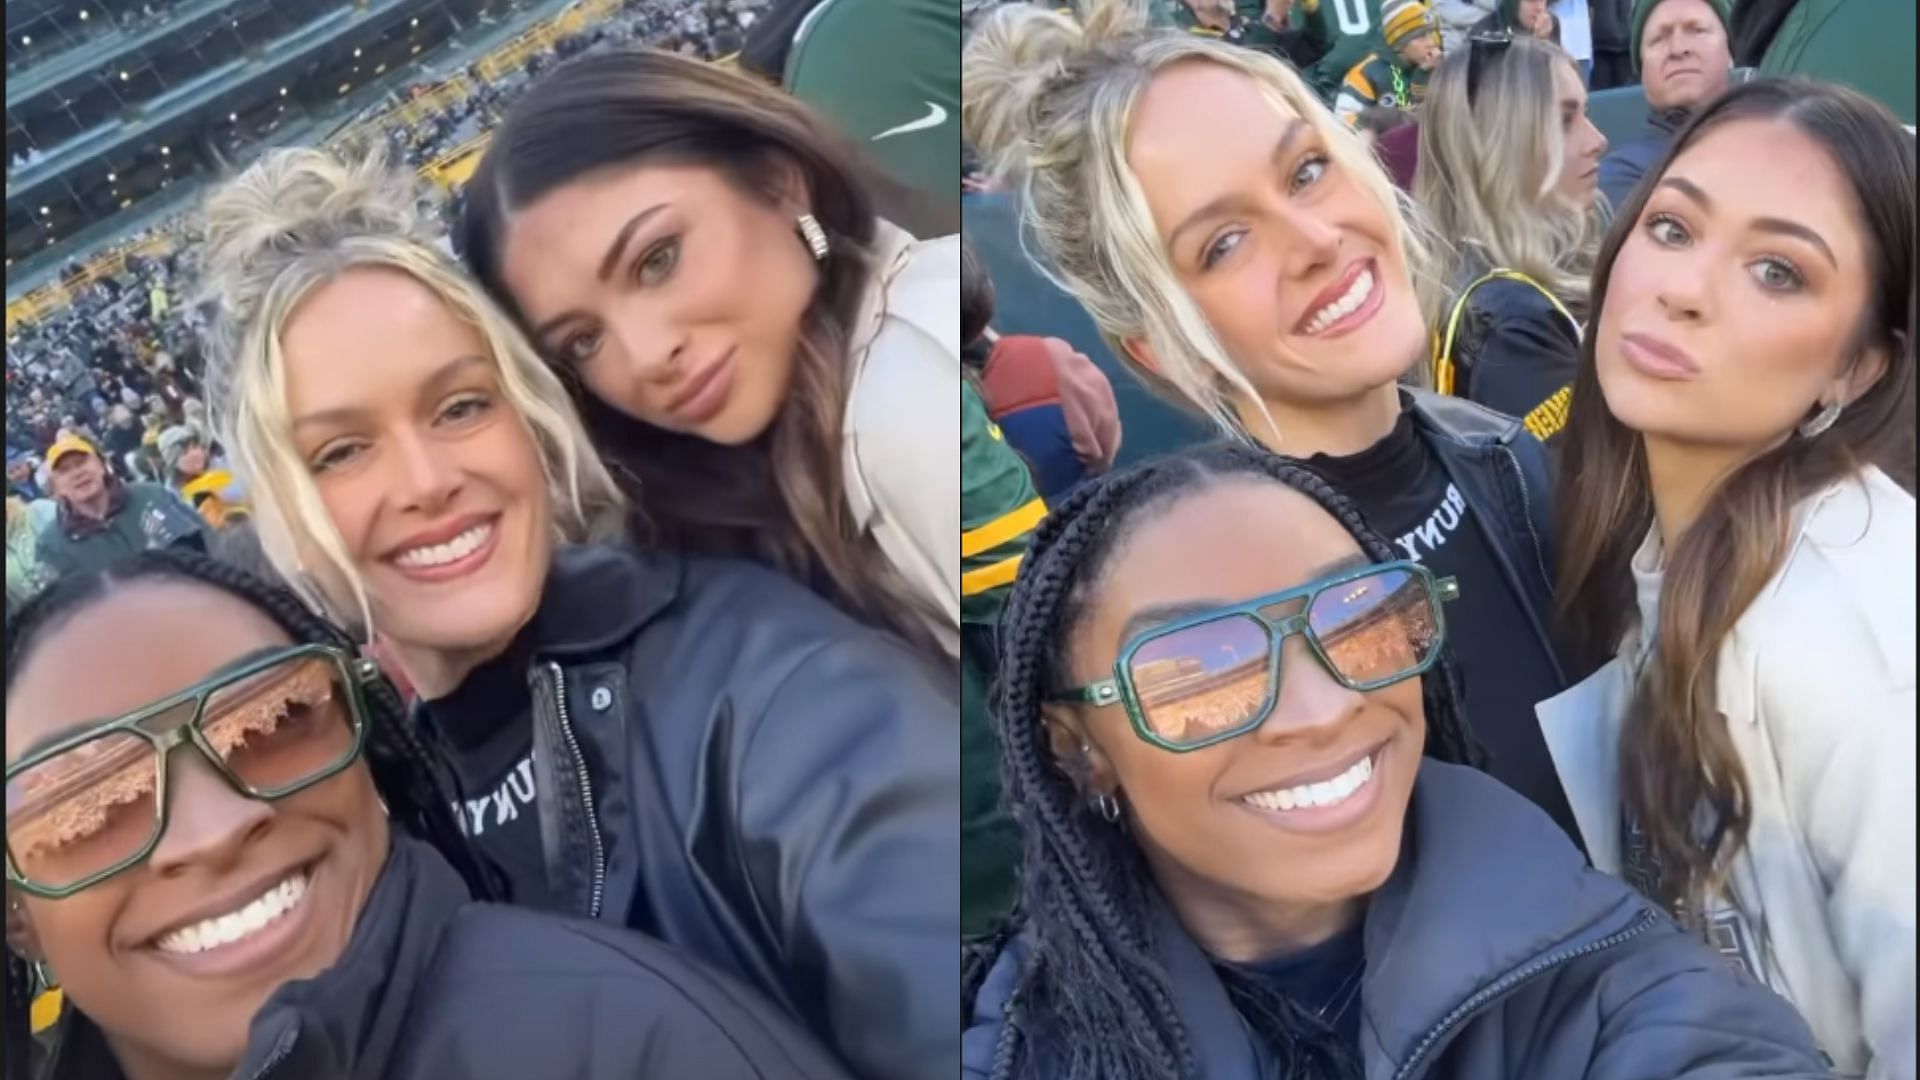 Simone Biles with some friends at the Green Bay Packers